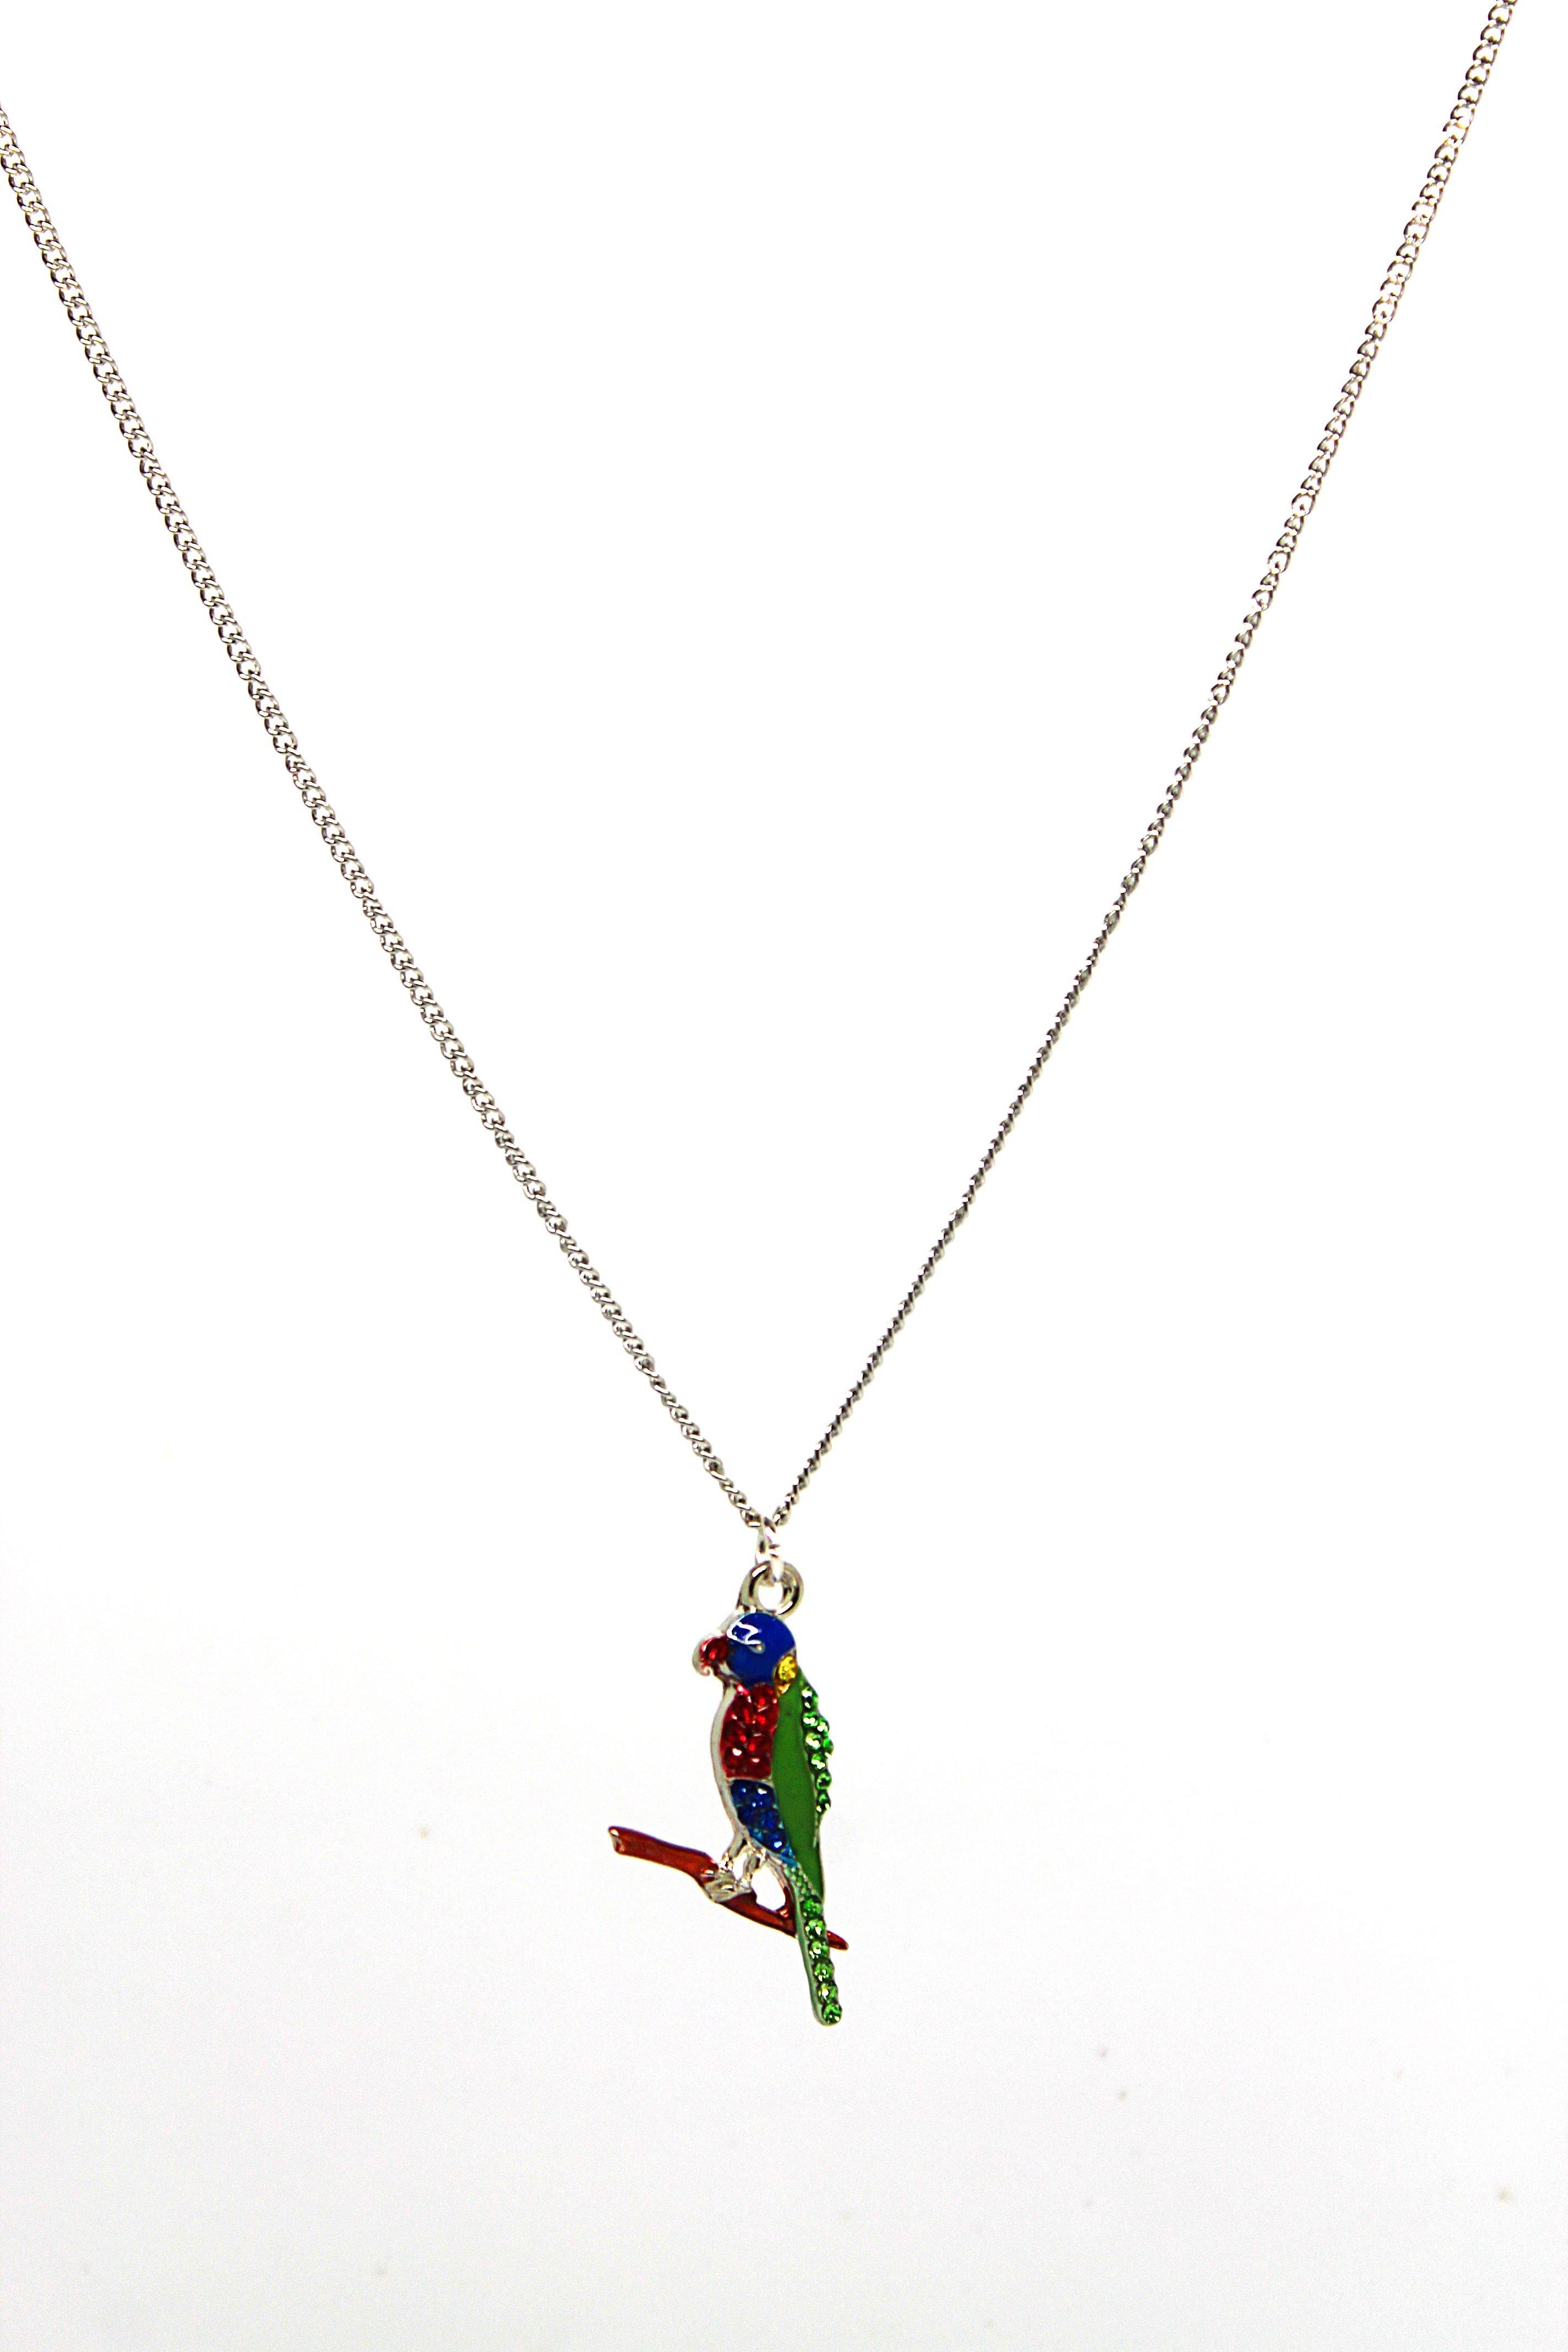 Lorikeet Necklace - Wildtouch - Wildtouch